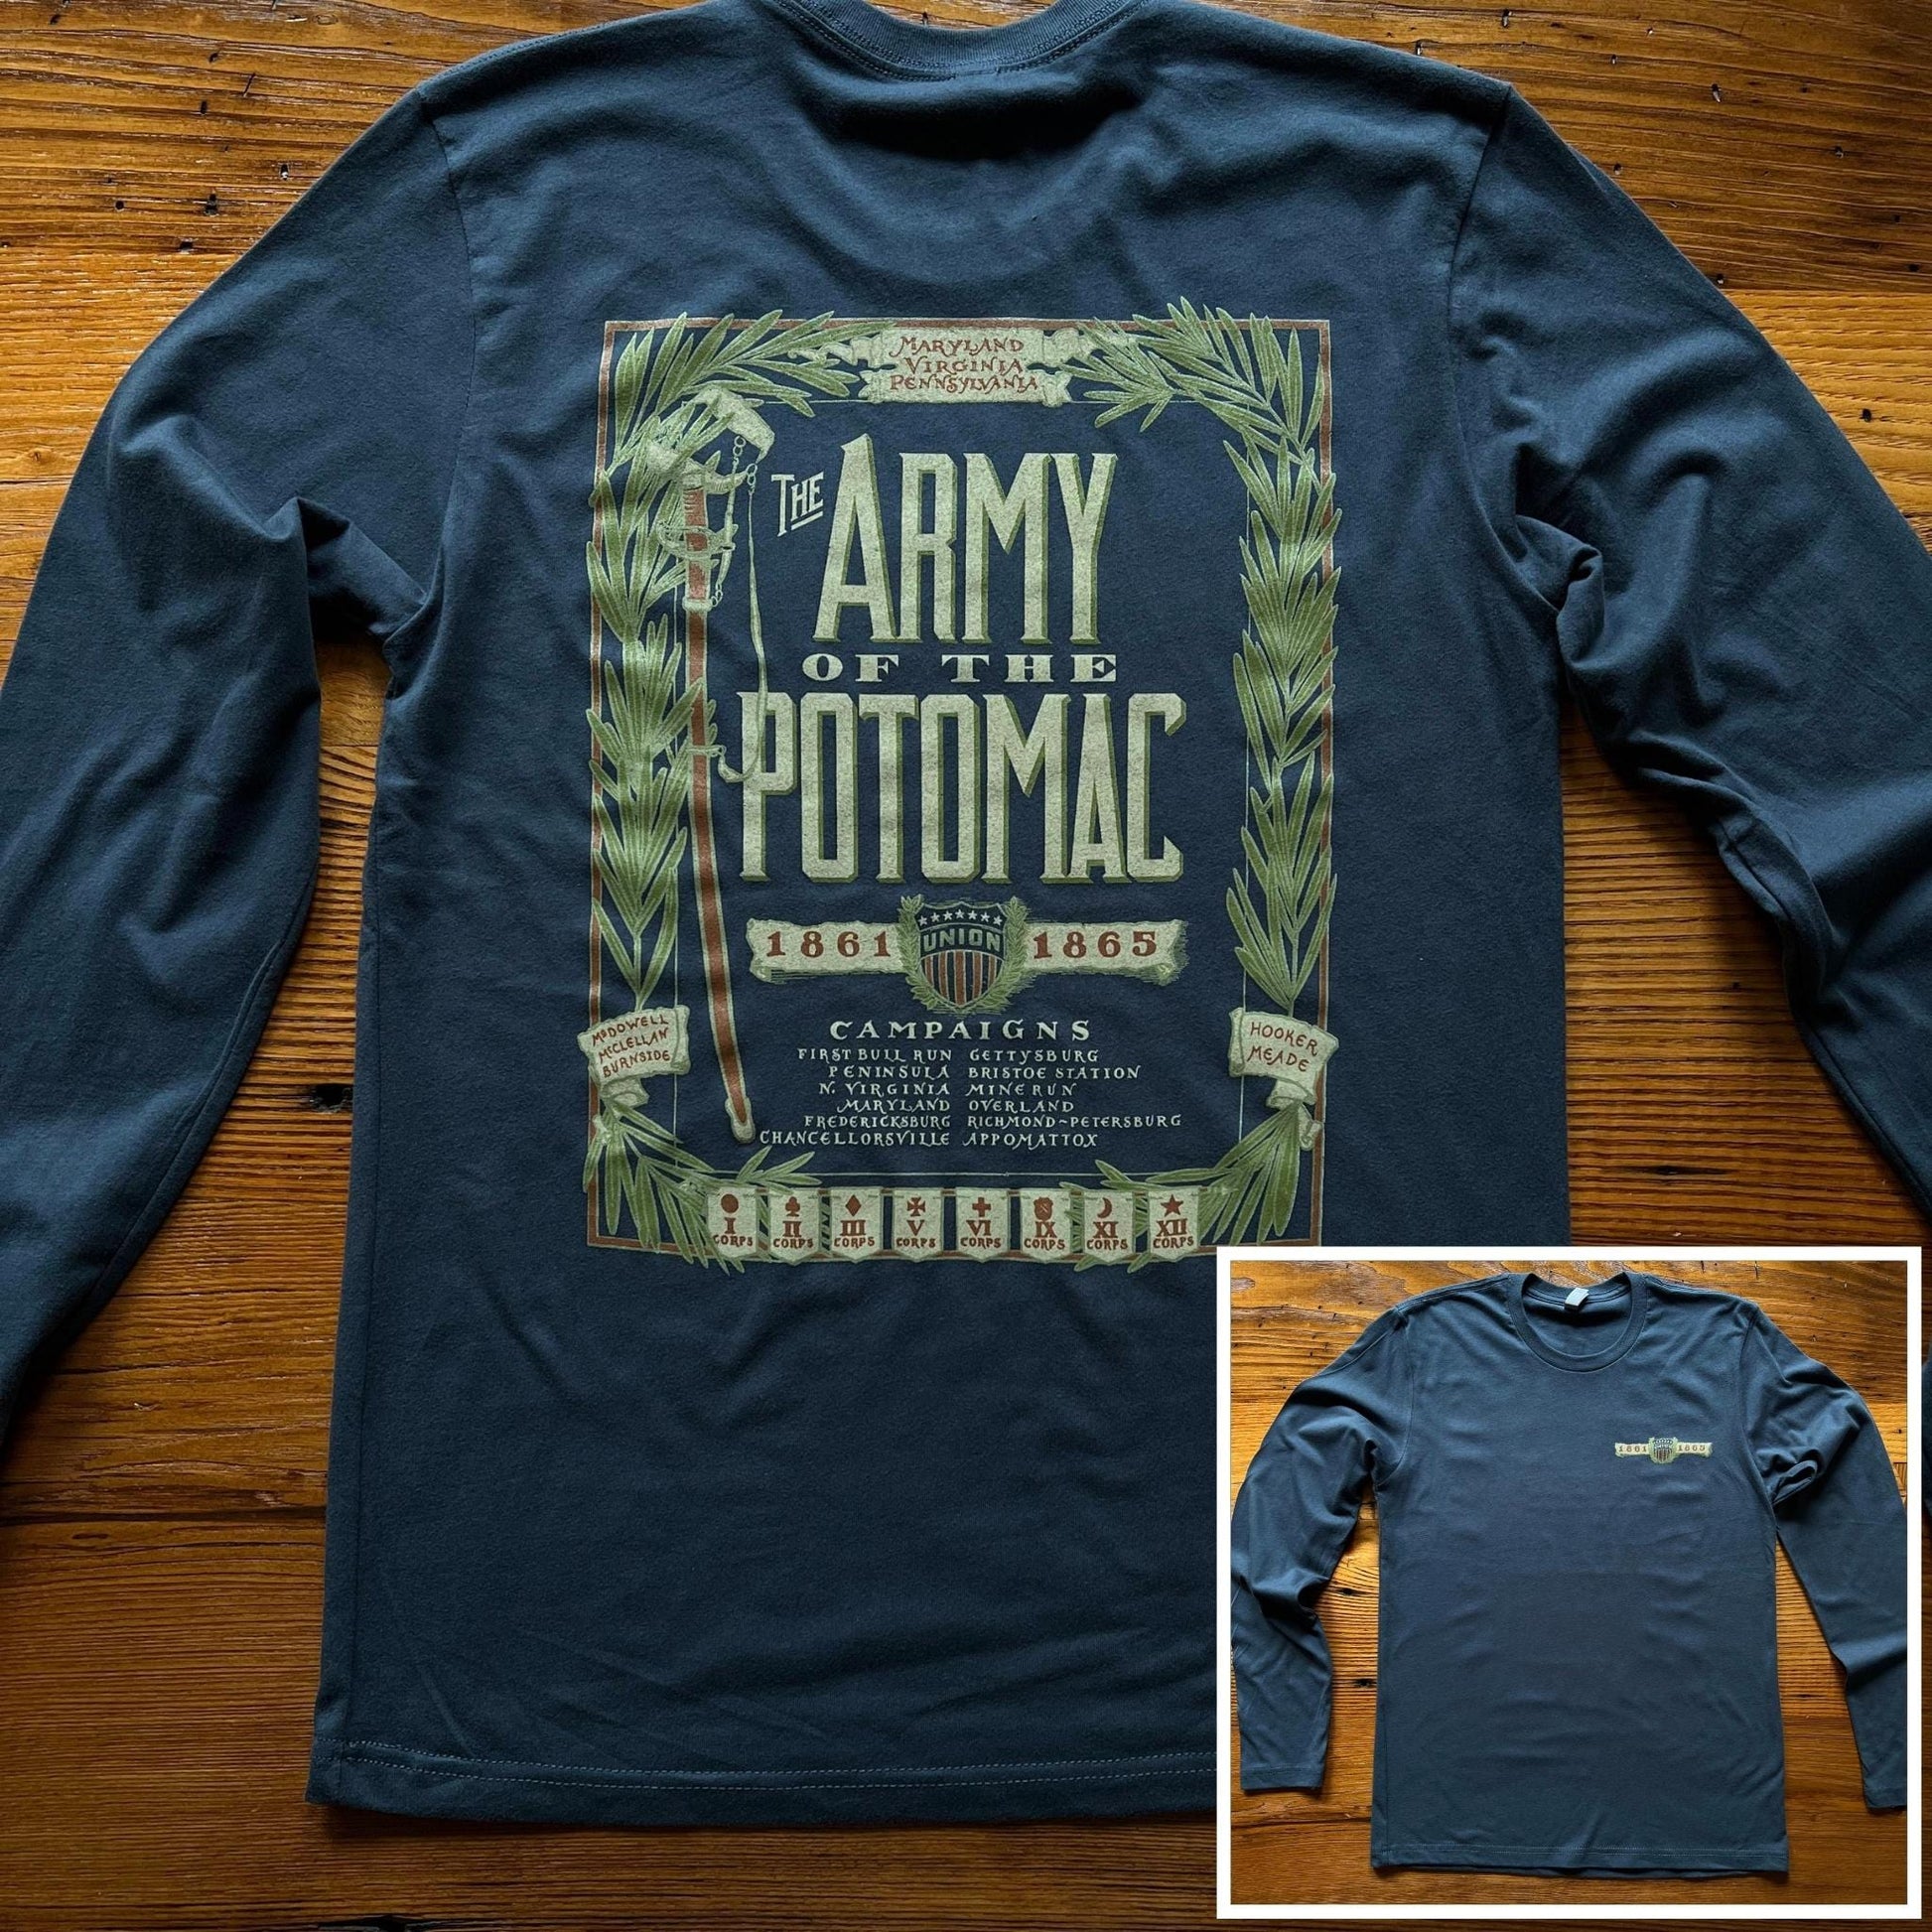 "The Army of the Potomac" Long-sleeved shirt from The History List store